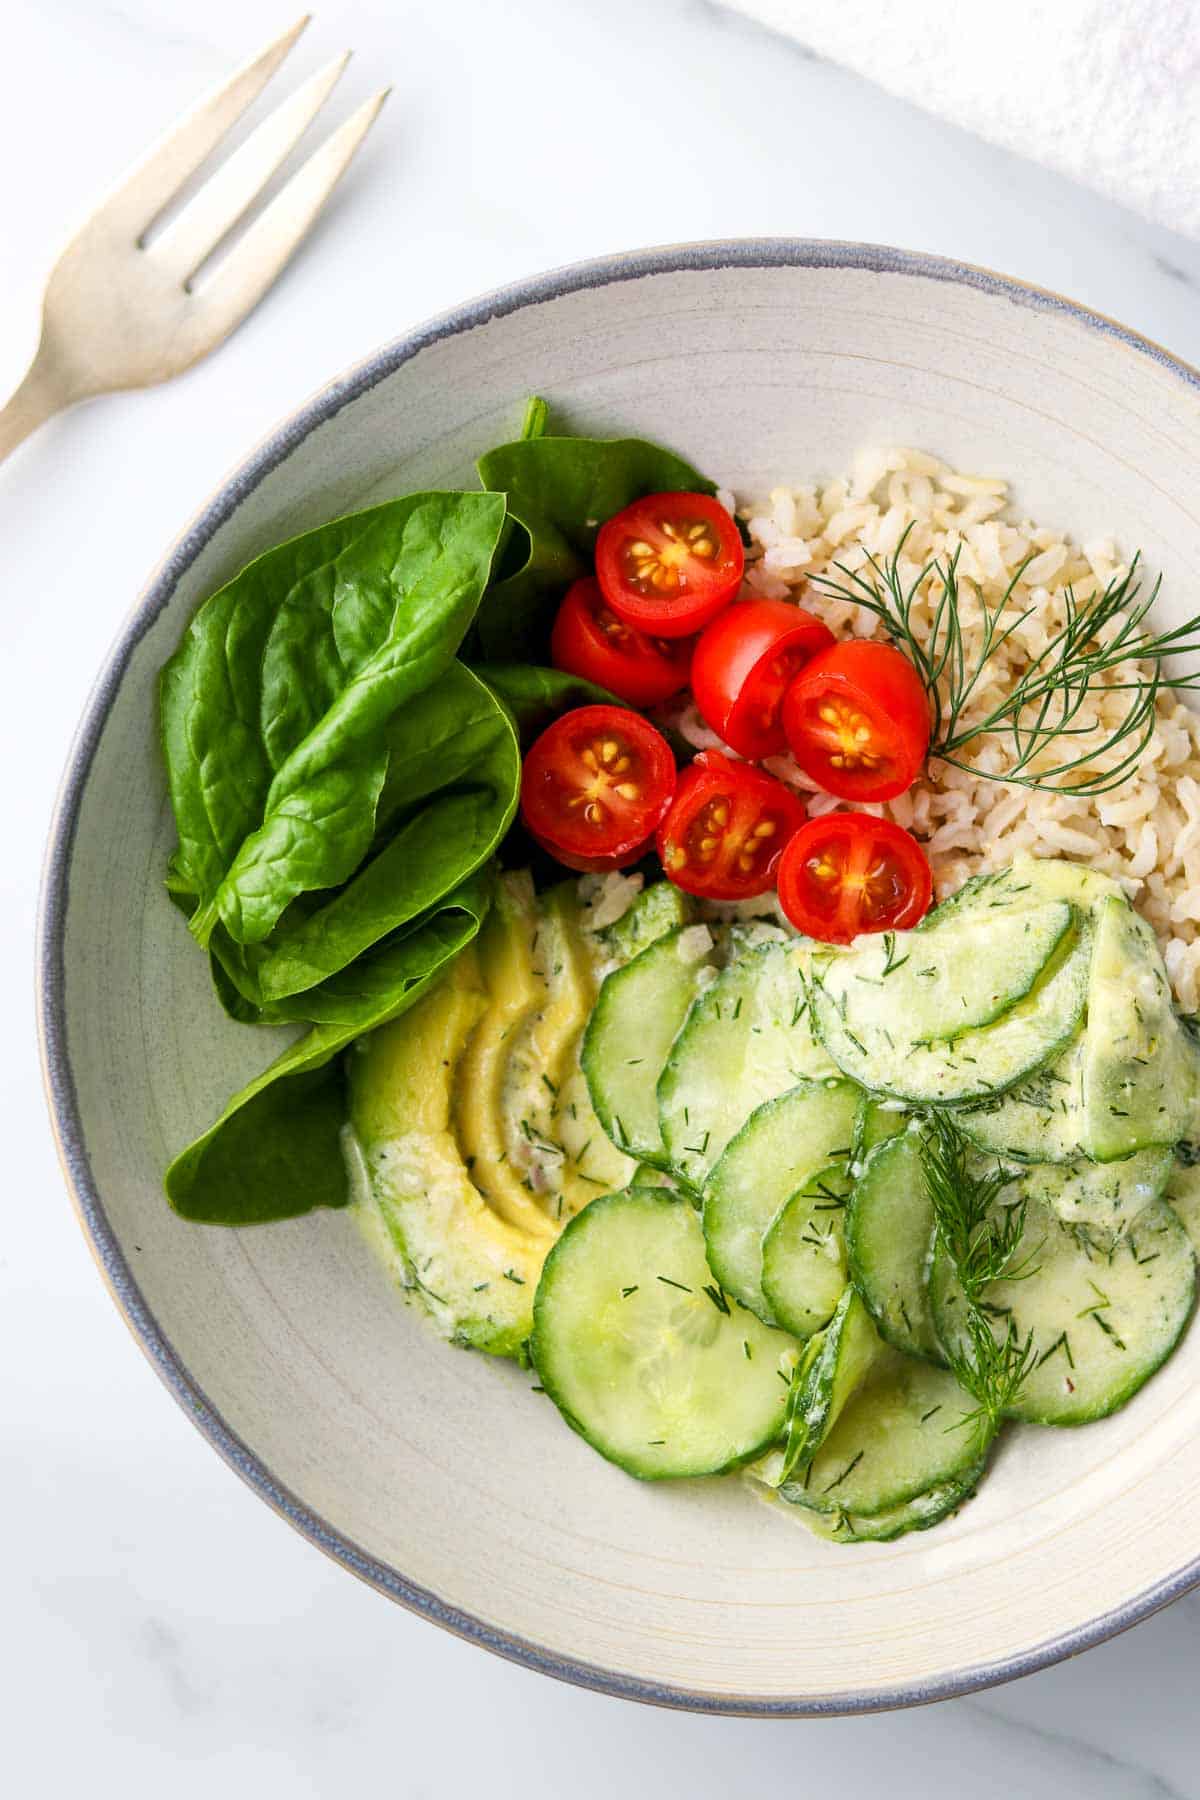 Cucumber salad, avocado, spinach, cherry tomatoes and rice in a bowl next to a fork.